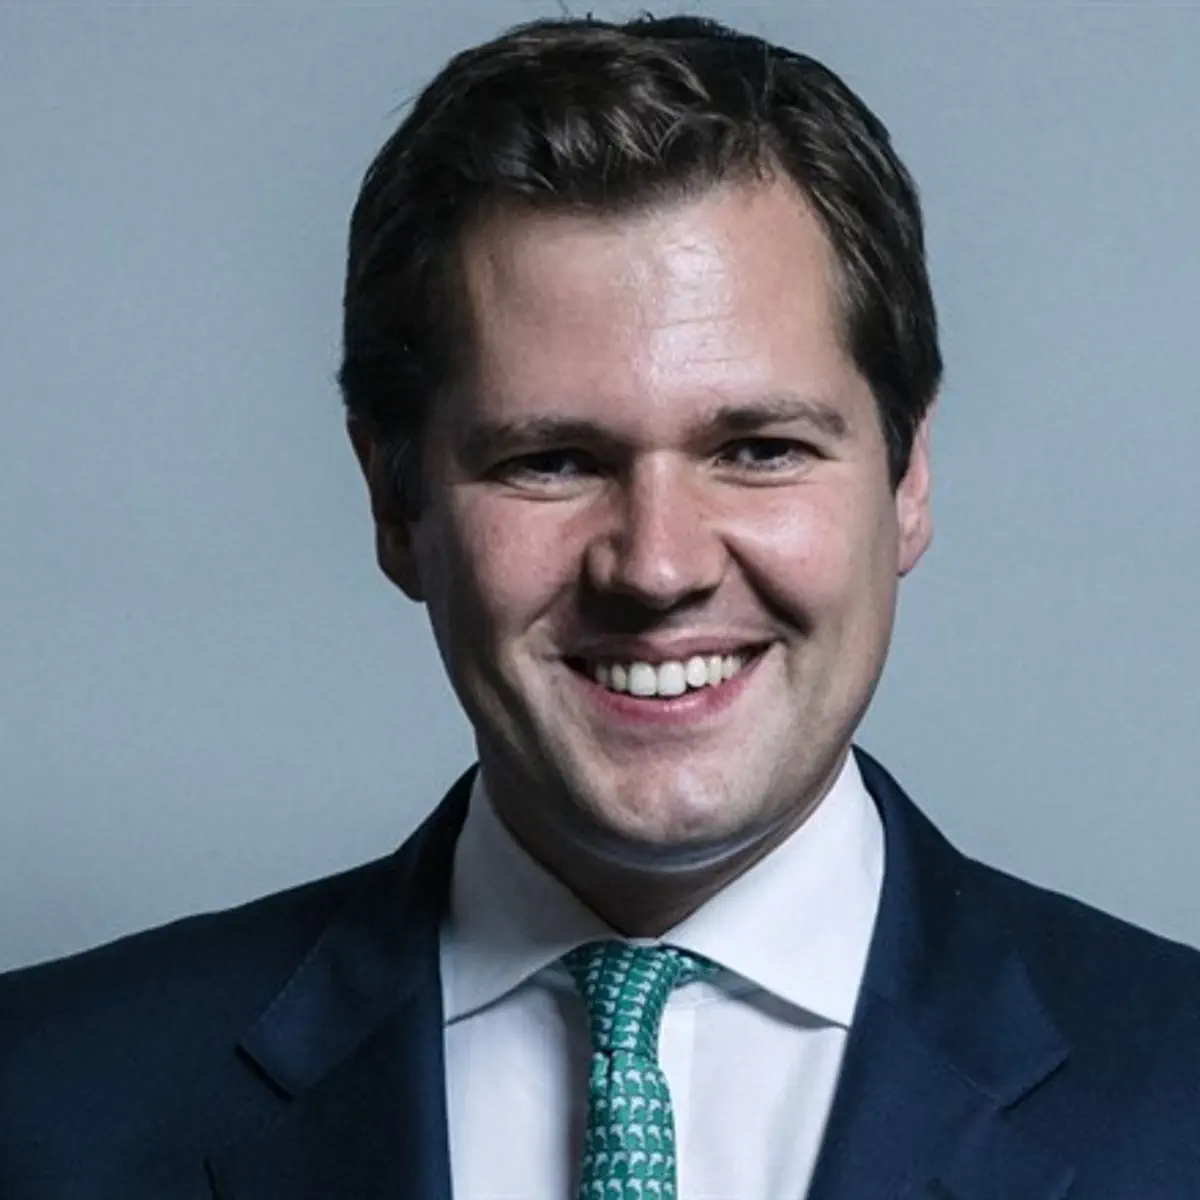 British MP: ‘In the coming months we will work to outlaw BDS in the UK